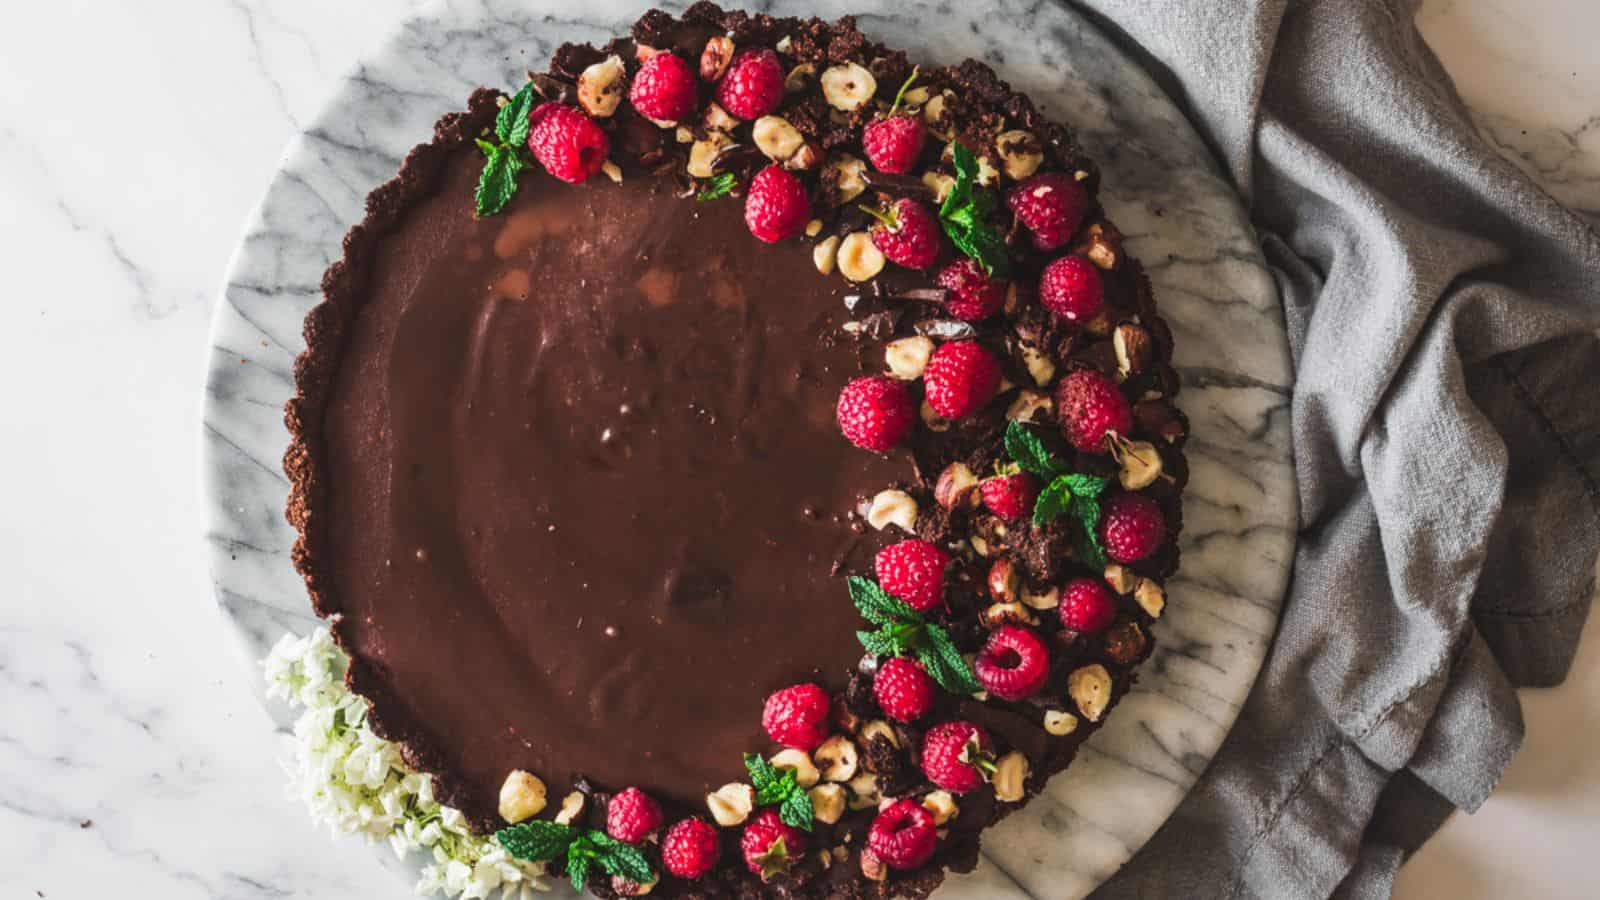 <p>Indulge in the perfect blend of rich chocolate and tangy raspberries with this elegant tart. With its smooth and decadent filling, this dessert offers a sophisticated taste while being an ideal choice for summer gatherings.<br><strong>Get the Recipe: </strong><a href="https://immigrantstable.com/chocolate-raspberry-tart/?utm_source=msn&utm_medium=page&utm_campaign=msn">Chocolate Raspberry Tart</a></p>